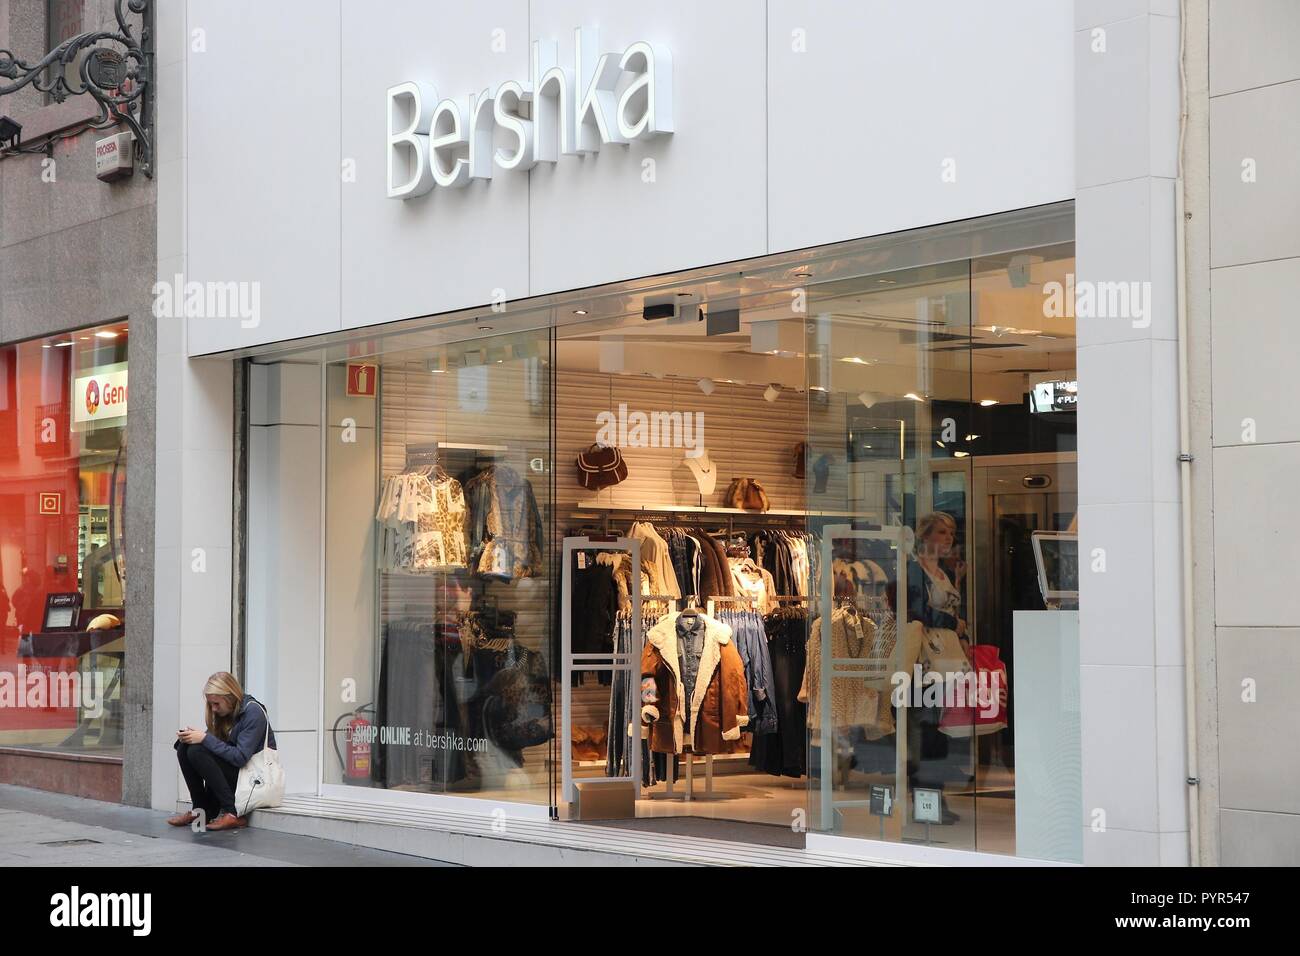 Clothing Stores Spain High Resolution Stock Photography and Images - Alamy